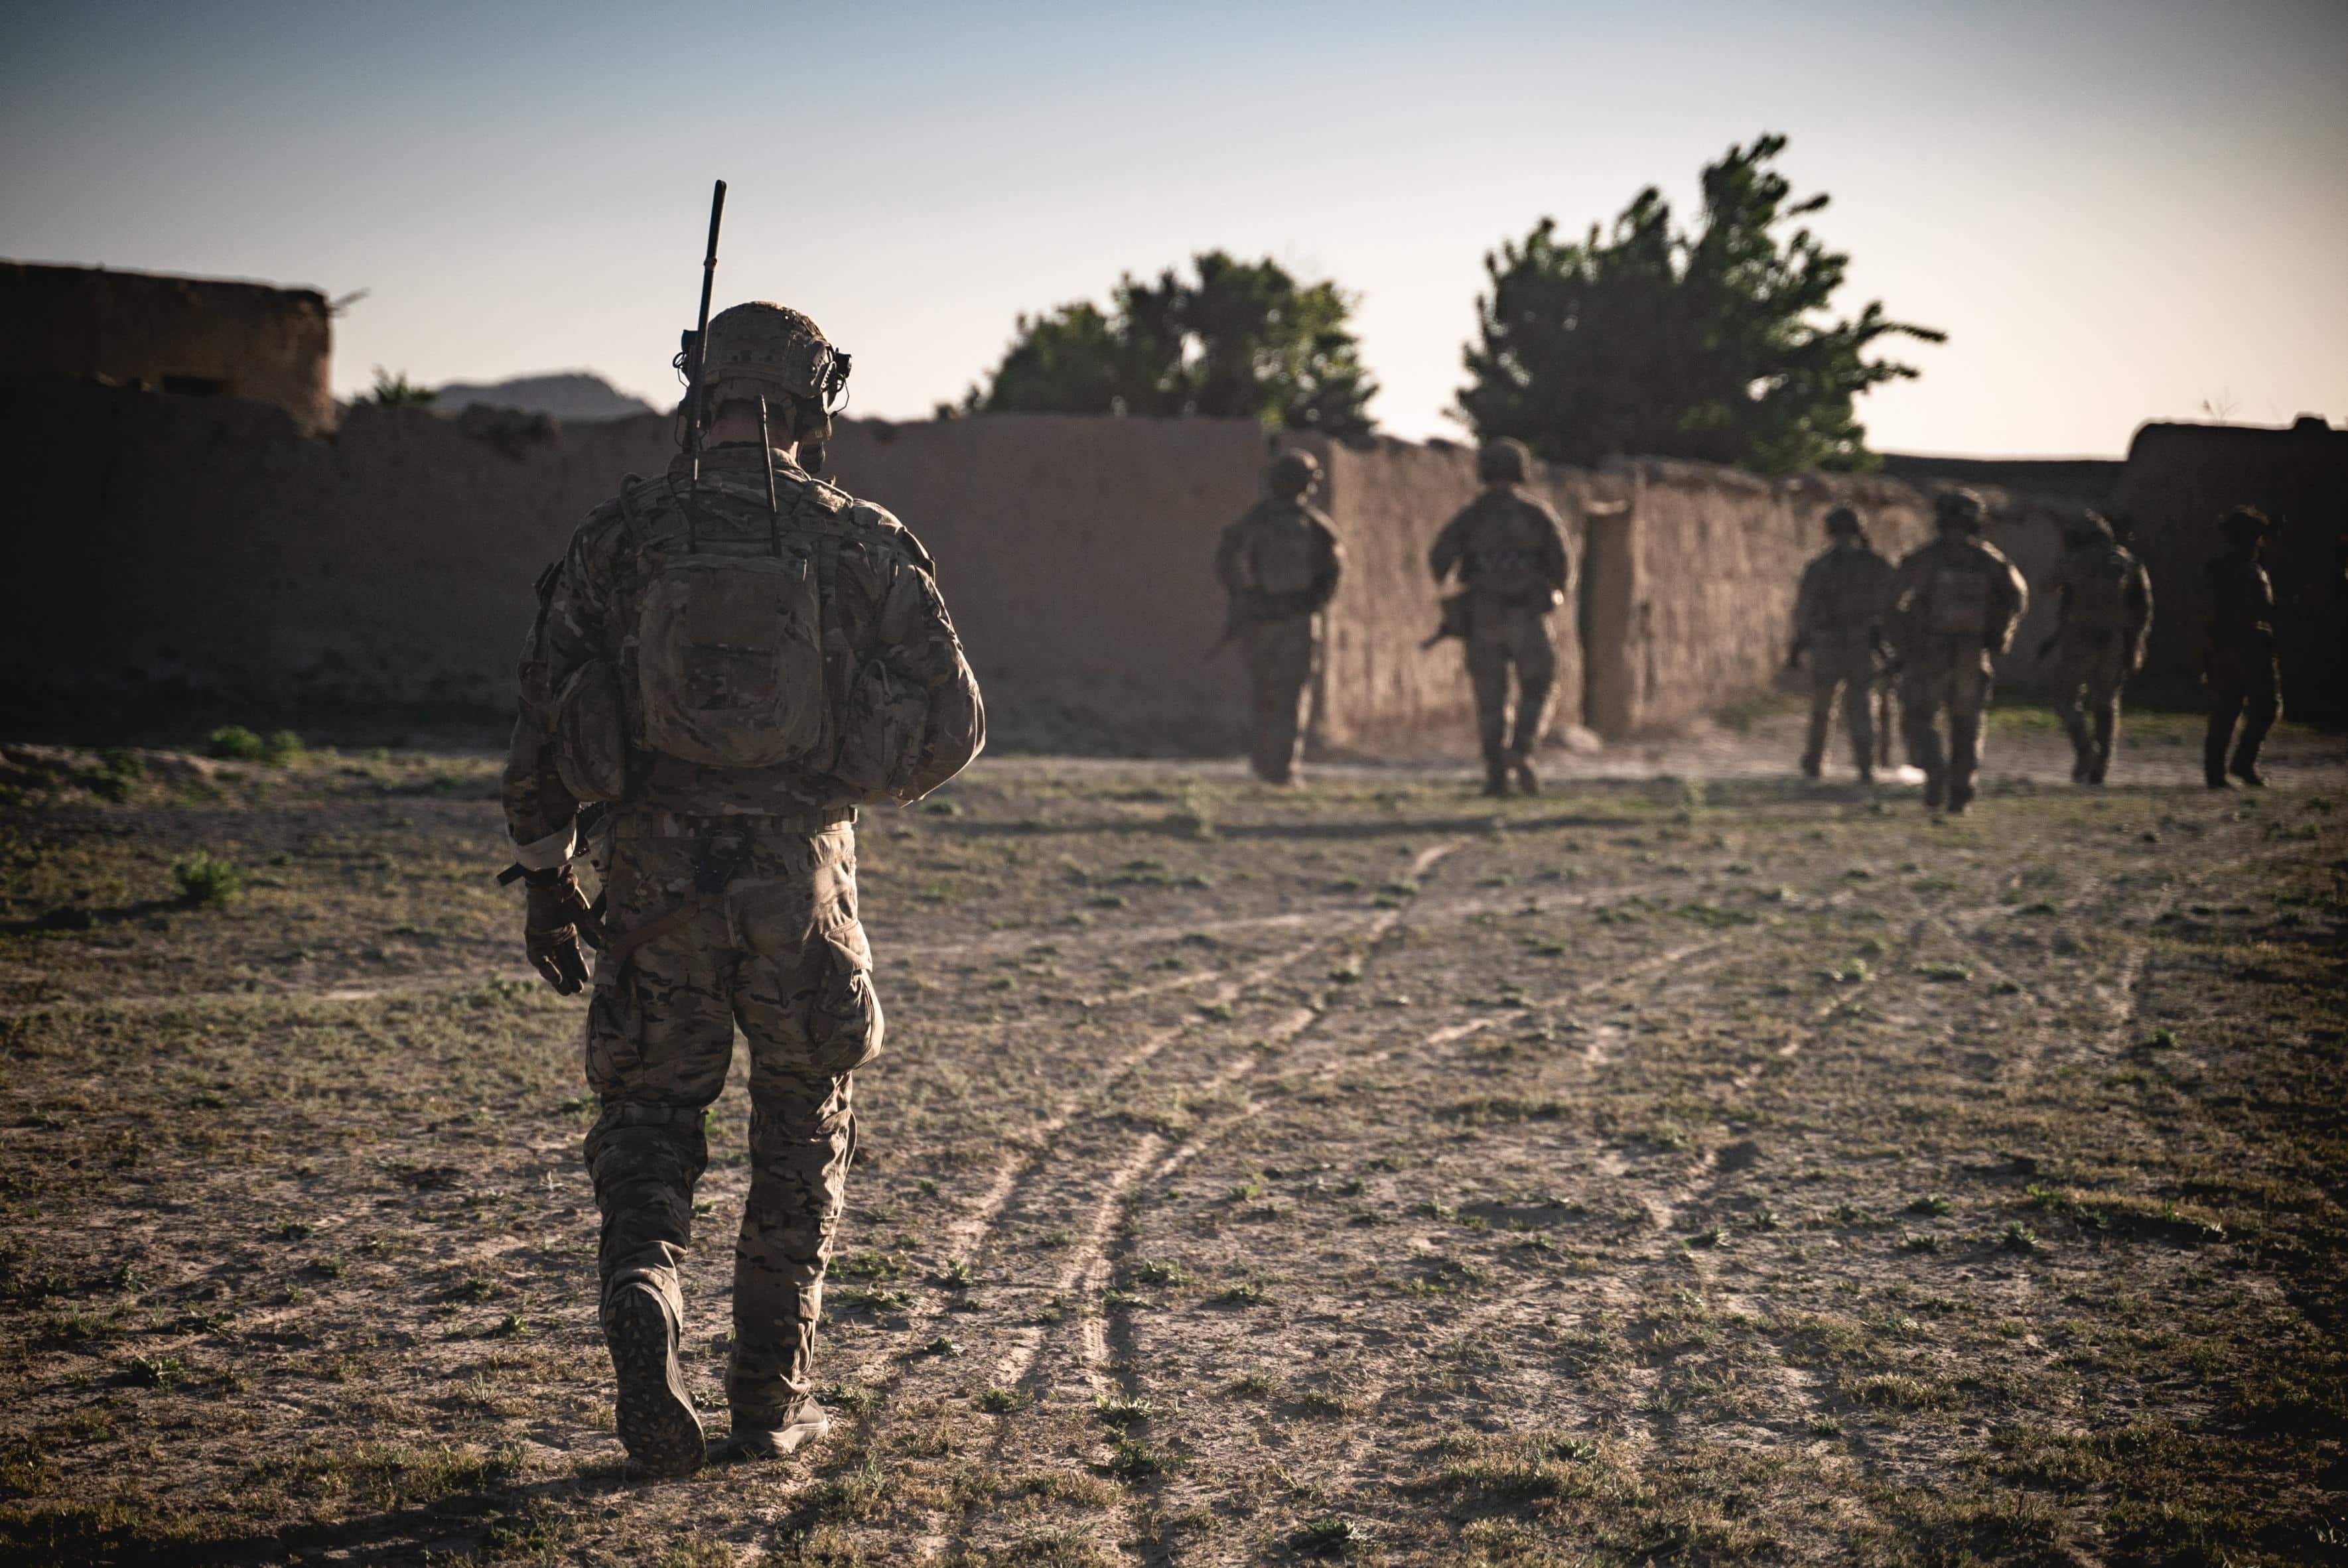 U.S. special operations service members conduct combat operations in support of Operation Resolute Support in Southeast Afghanistan, May 2019. RS is a NATO-led mission to train, advise, and assist the Afghan National Defense and Security Forces and institutions. (U.S. Army photo by Sgt. Jaerett Engeseth)